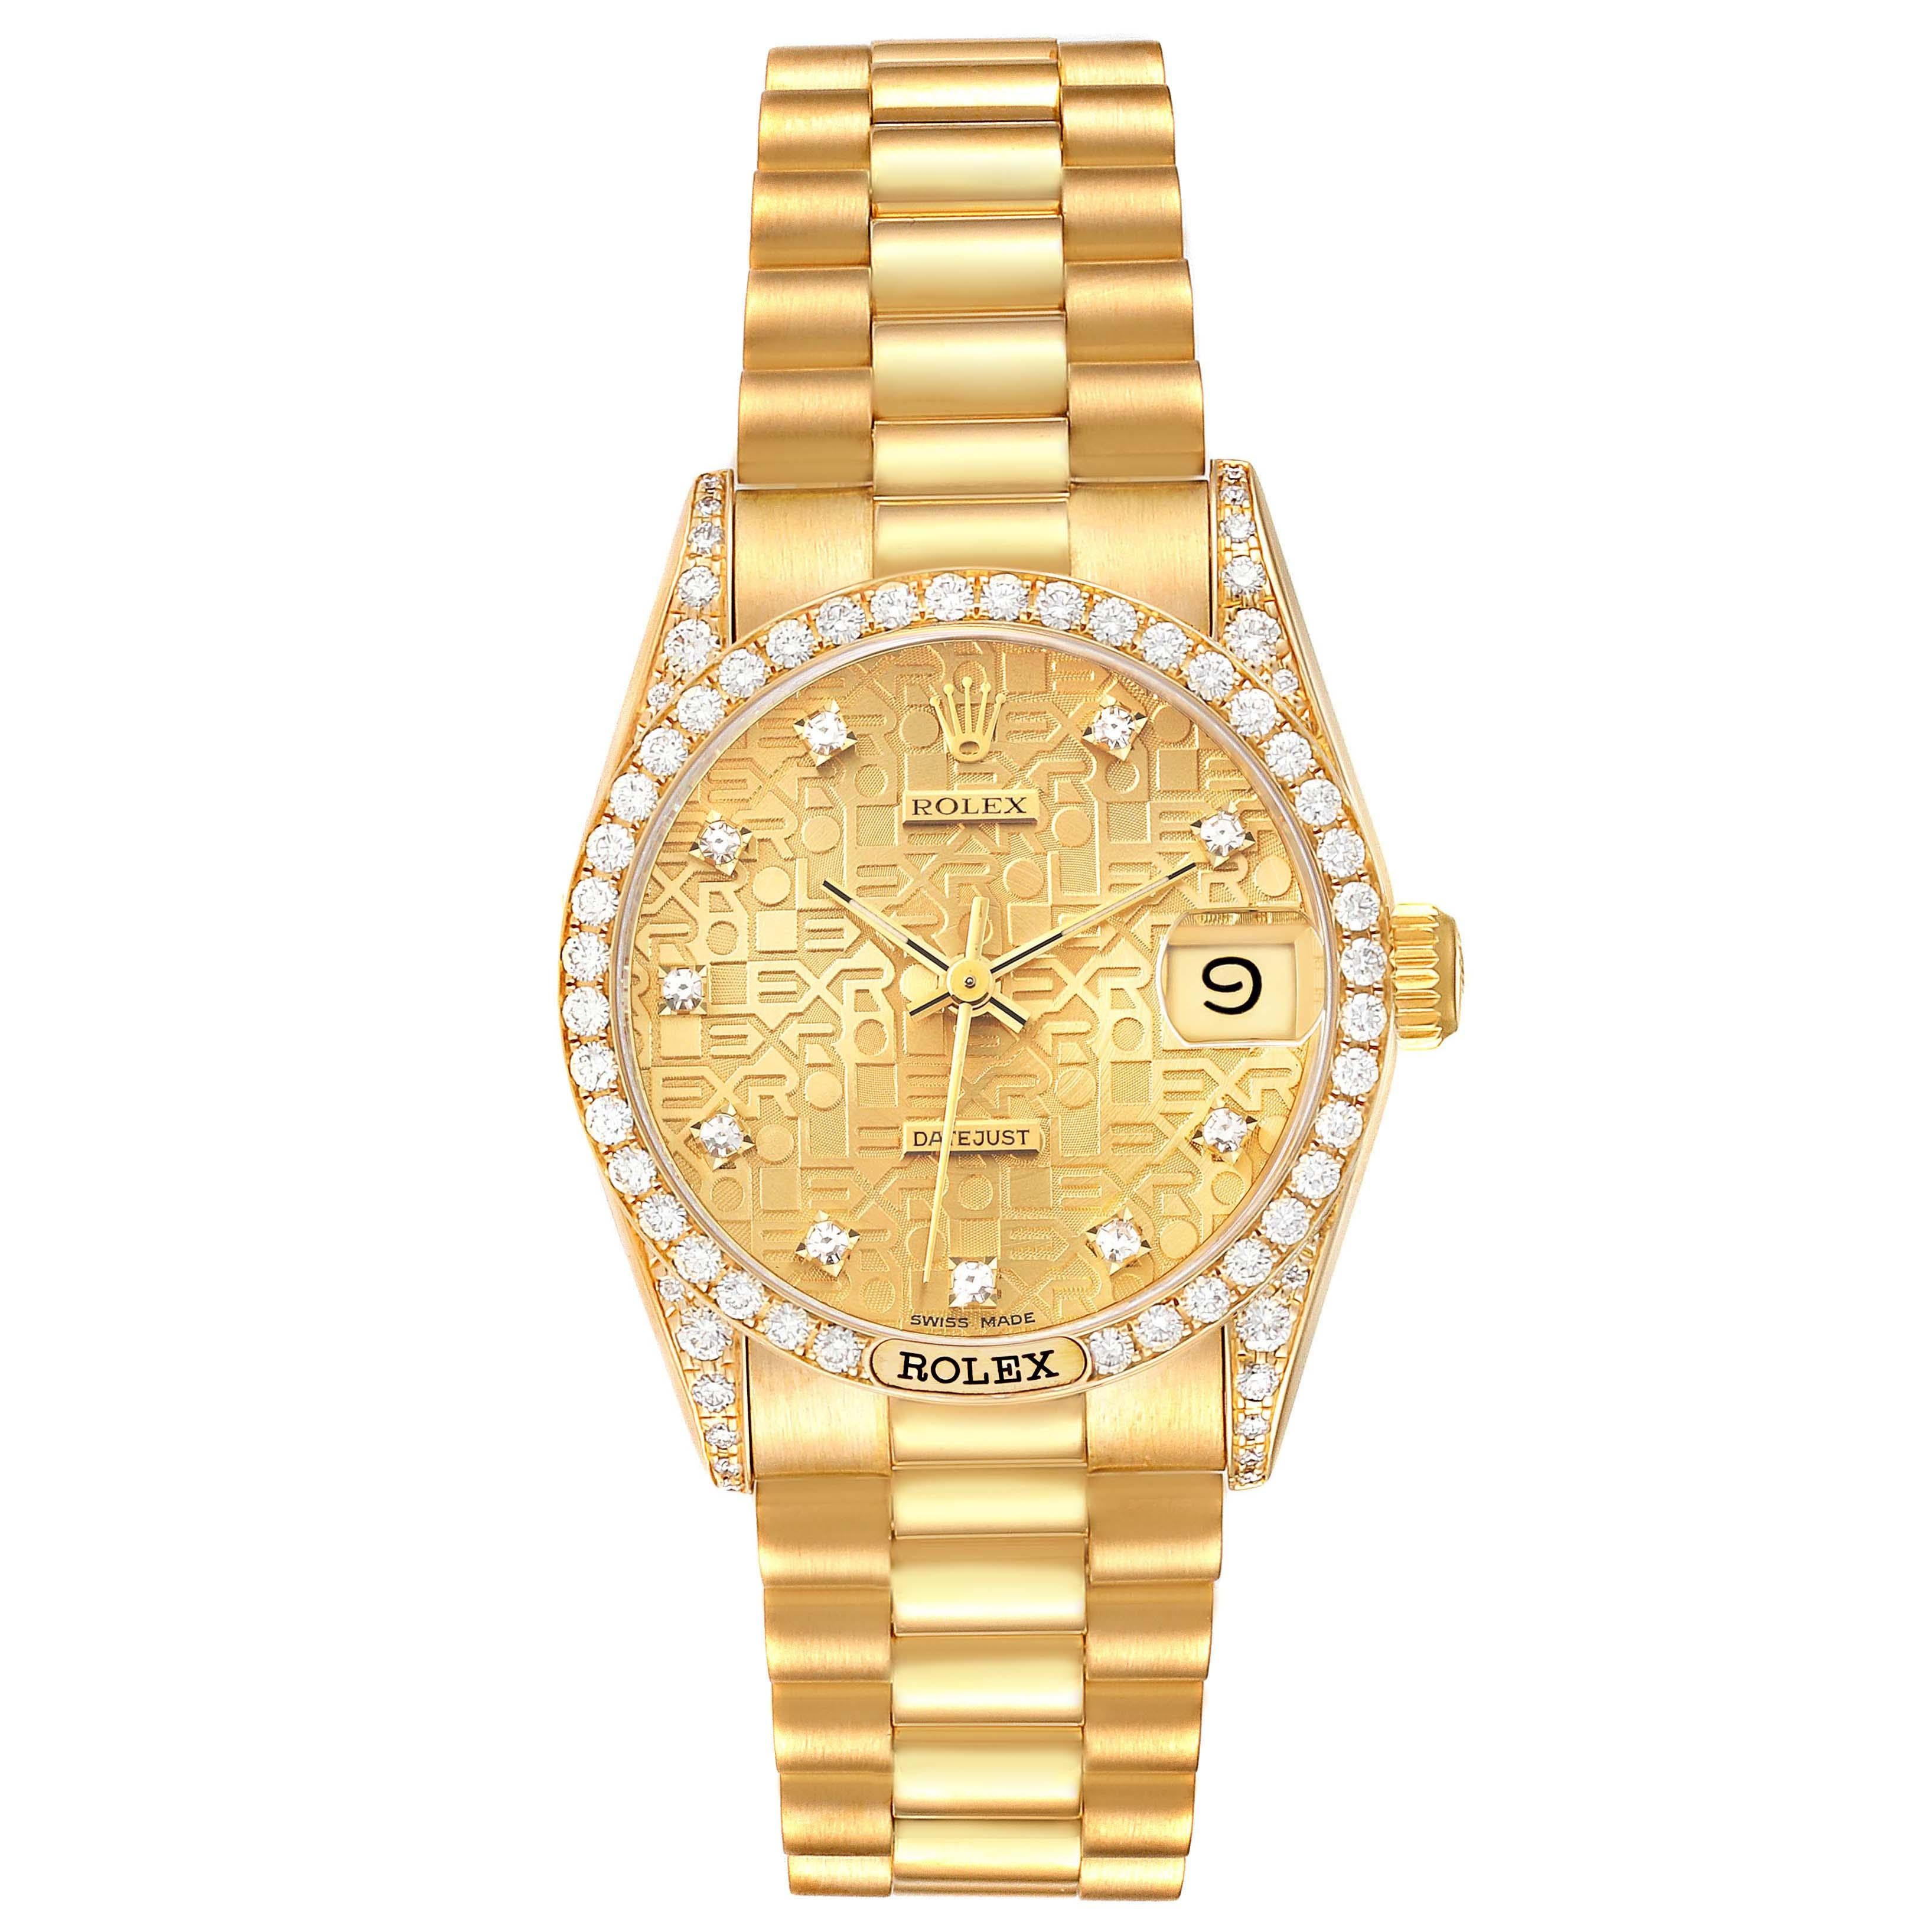 Rolex Datejust President Yellow Gold Anniversary Diamond Dial Ladies Watch 68158. Officially certified chronometer automatic self-winding movement. 18k yellow gold oyster case 31.0 mm in diameter. Rolex logo on the crown. Lugs set with original